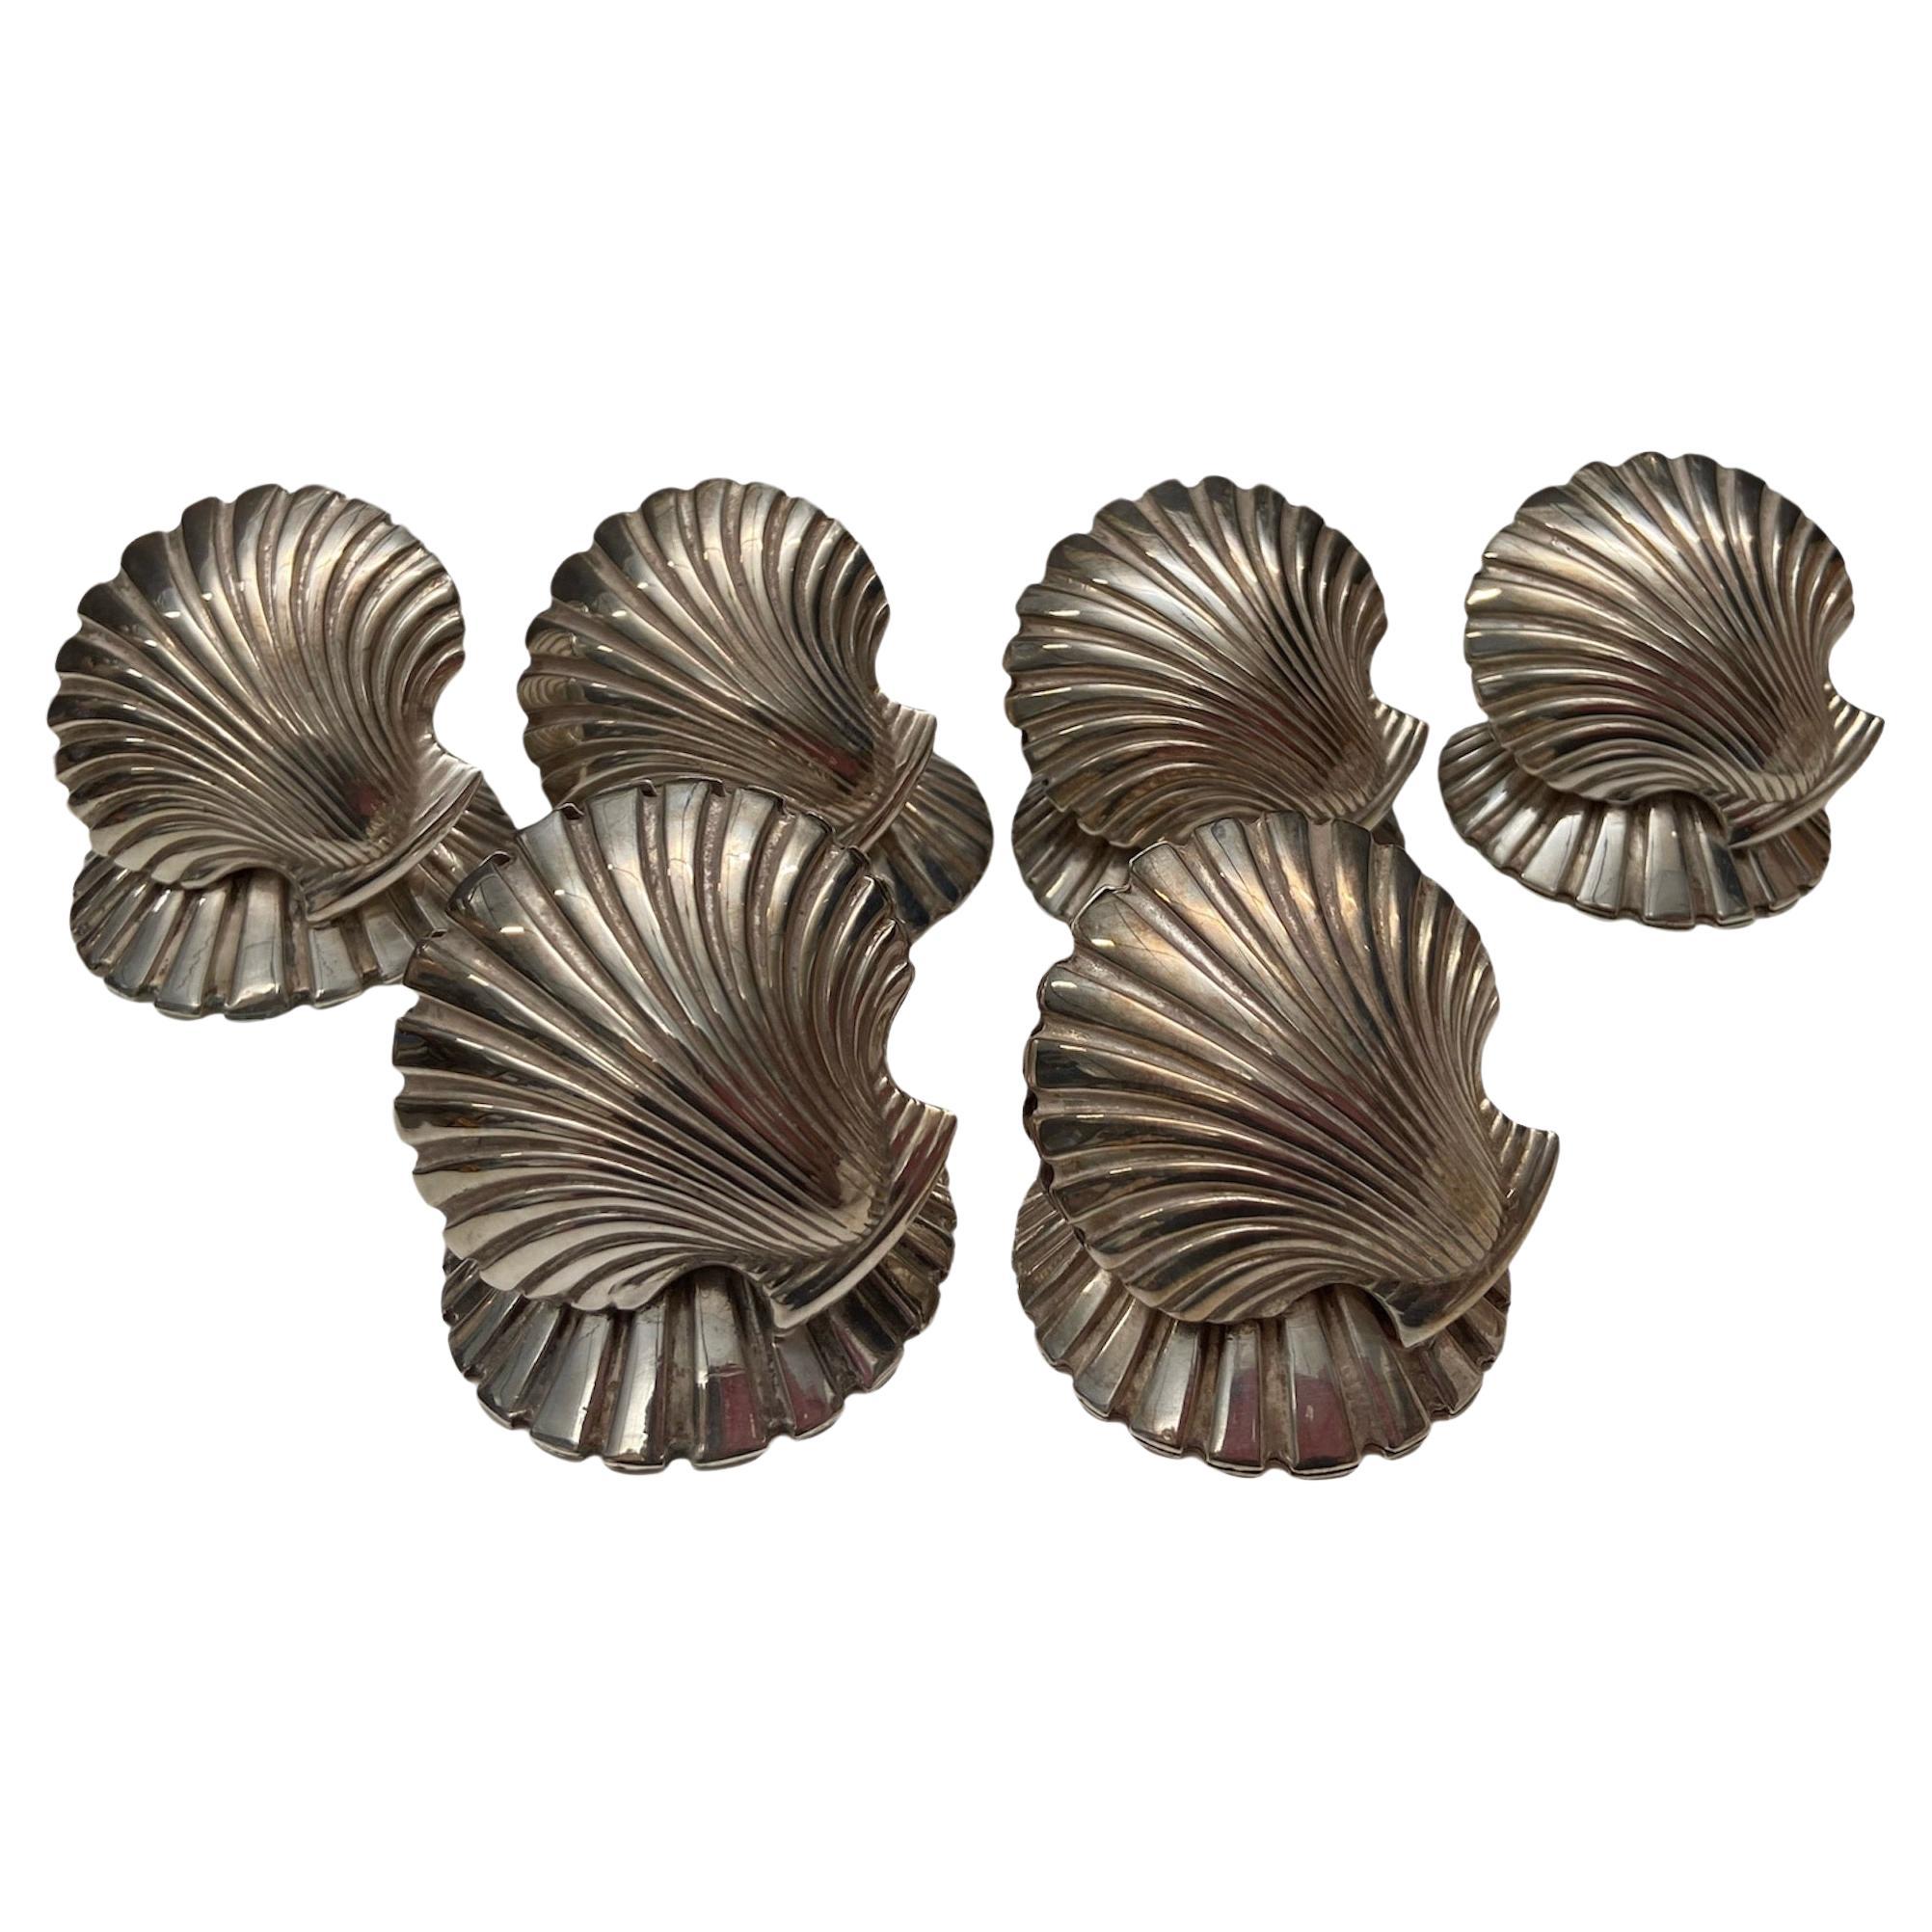 6 Vintage 1940s-1950s Silver Plated Shells, Place Card Holders, Fratelli Broggi For Sale